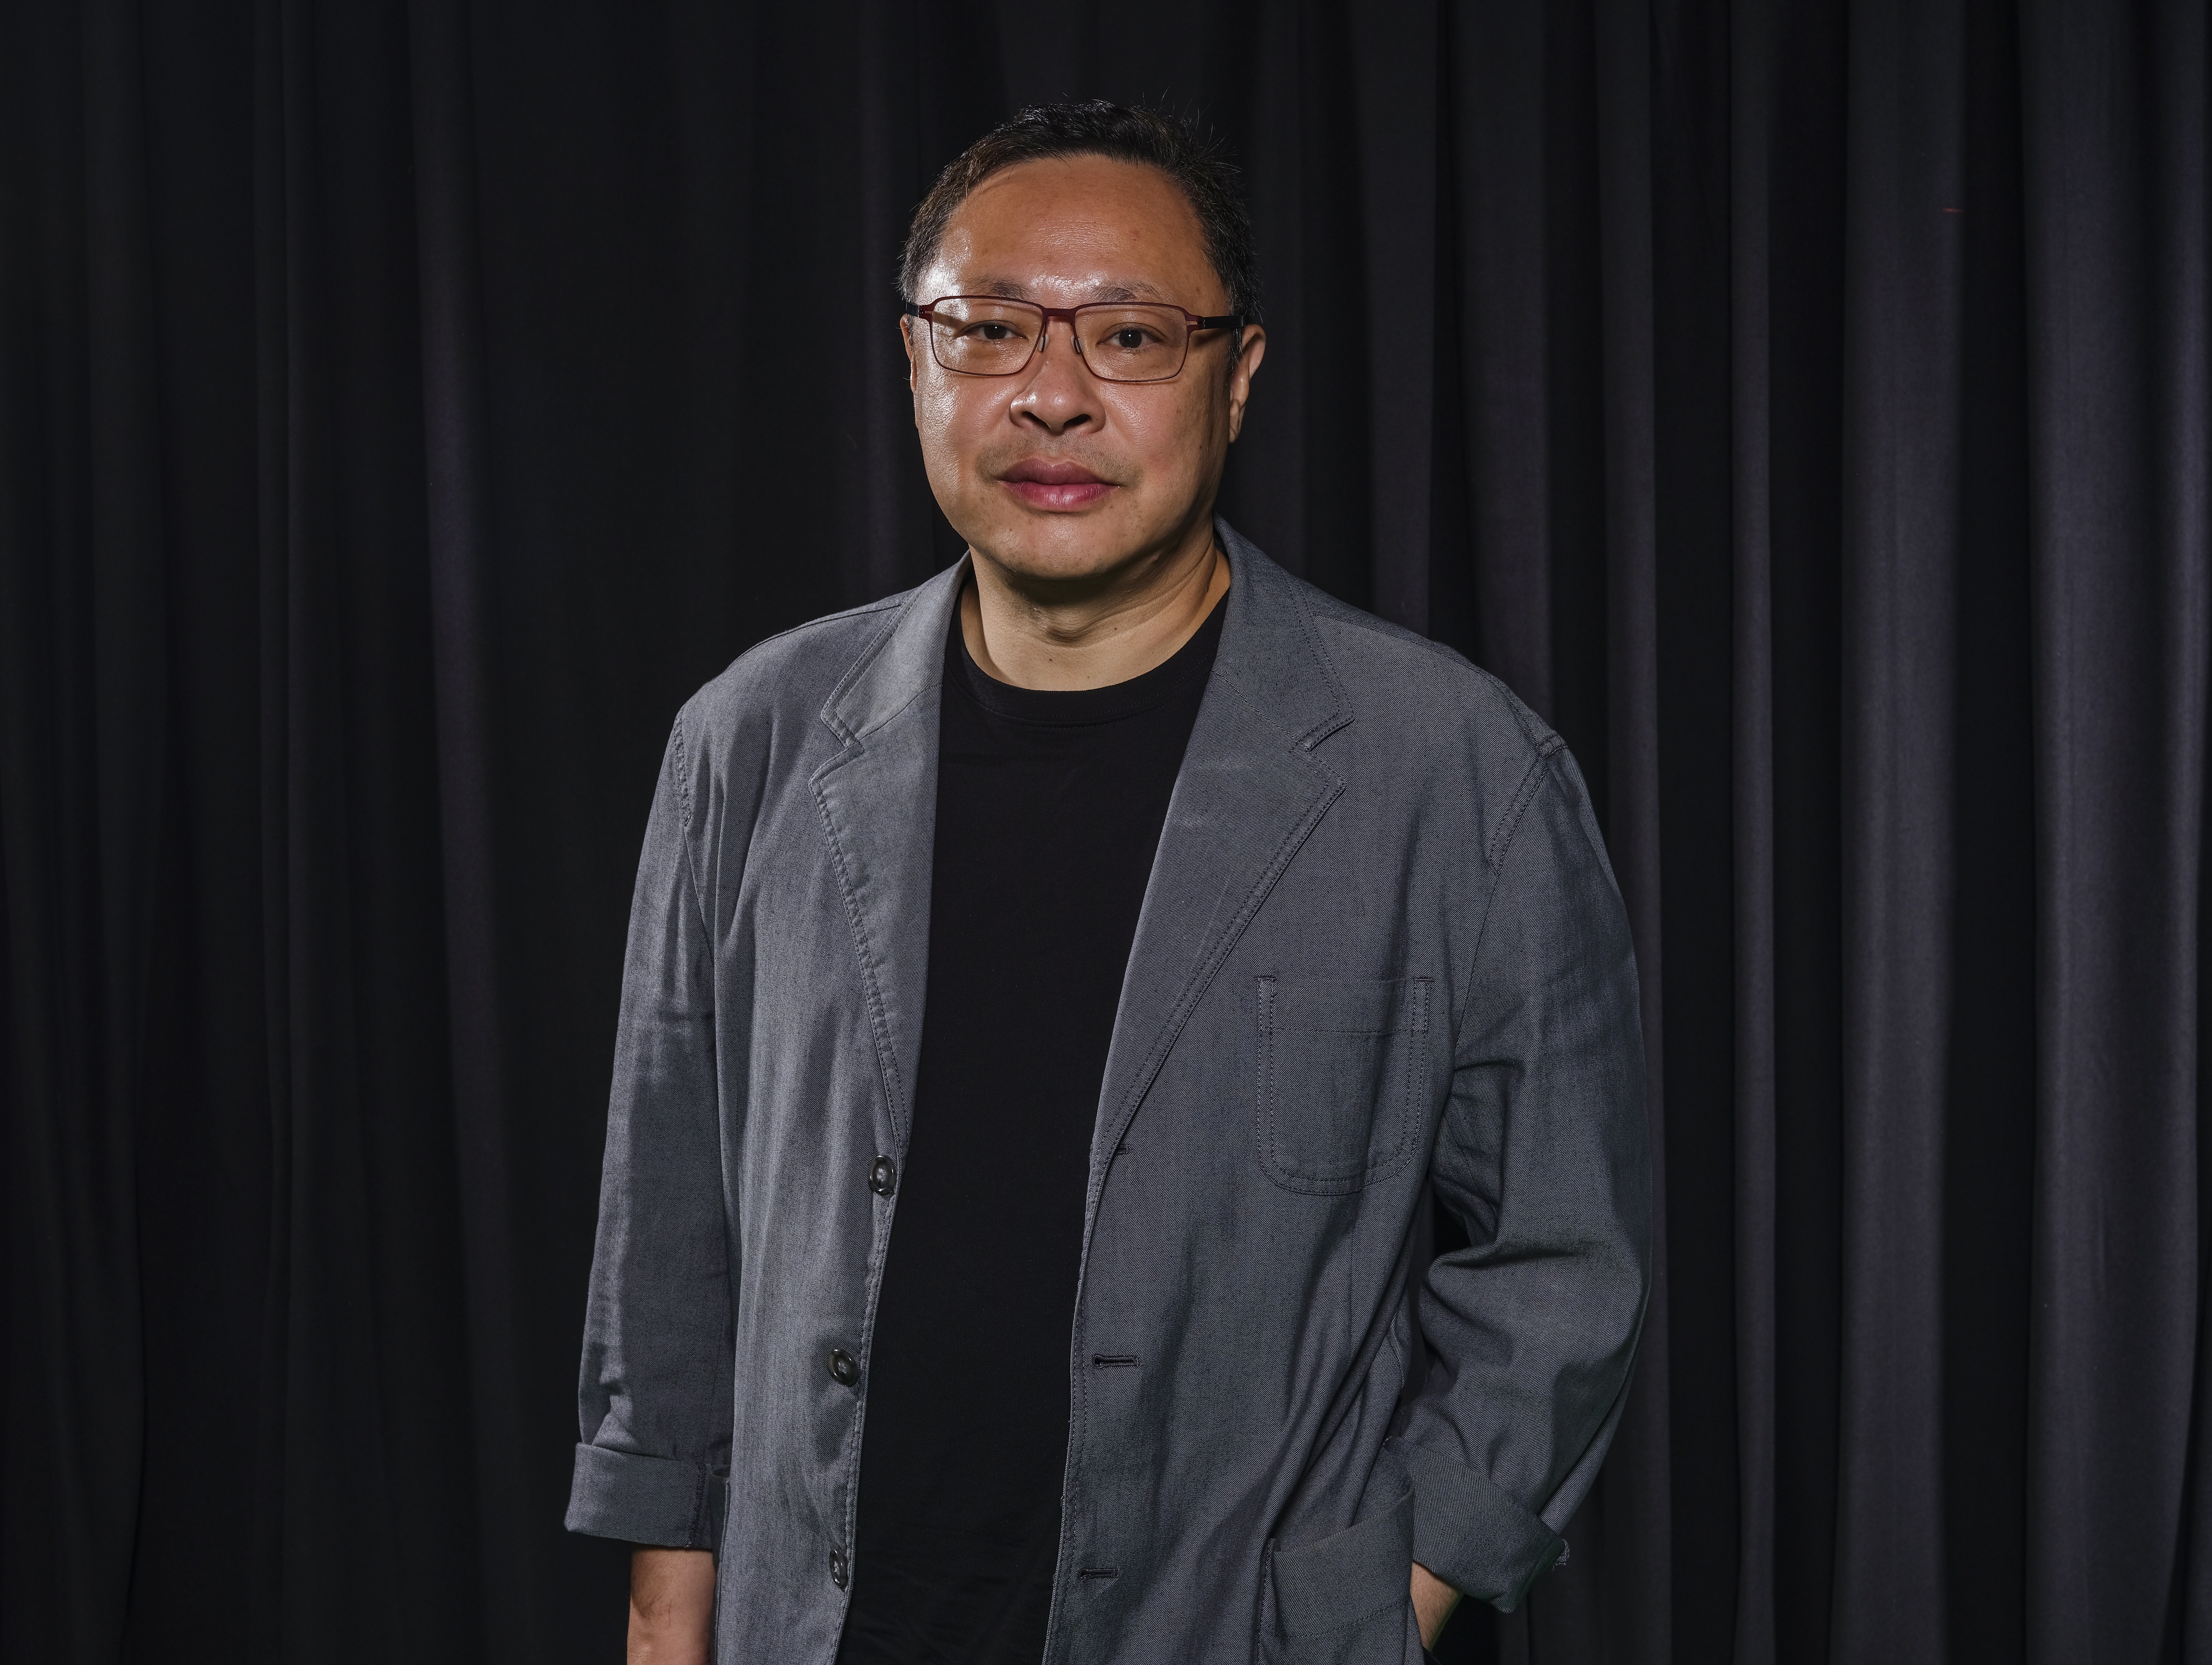 Benny Tai could not remain as a university employee because of his public nuisance convictions, says HKU’s governing council chairman Arthur Li. Photo: Robert Ng